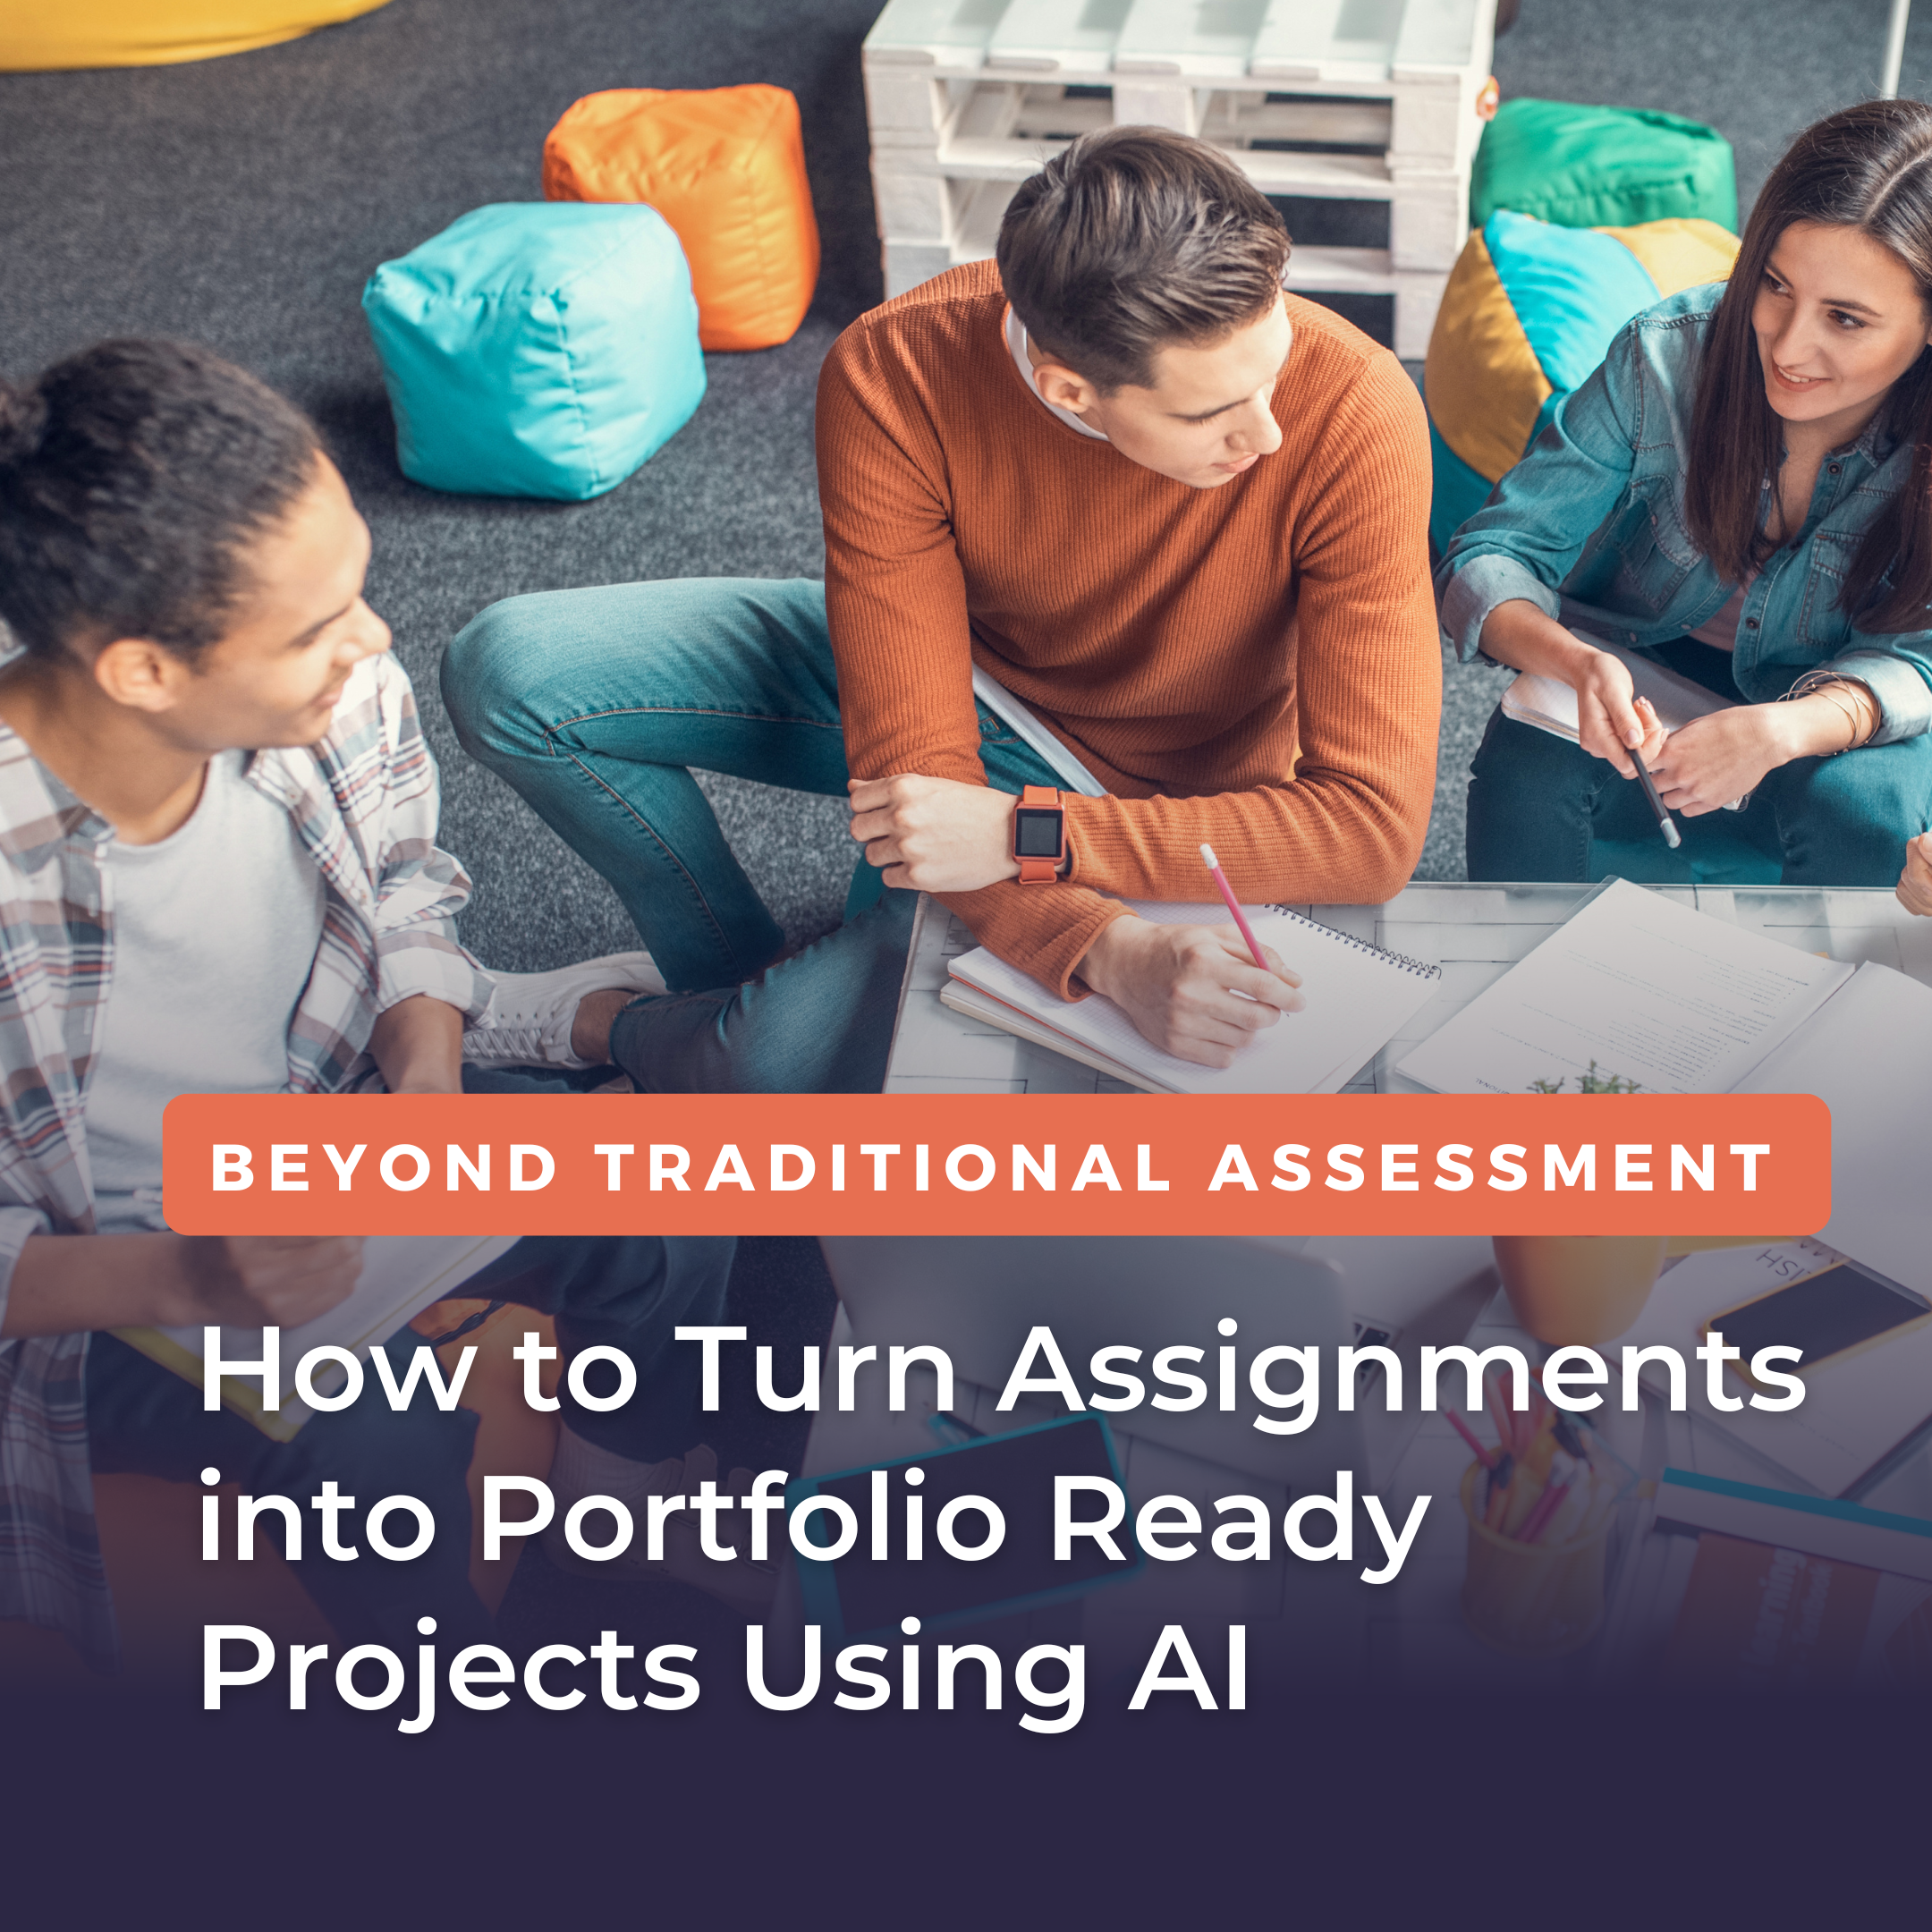 Designing Assessments in the Age of AI